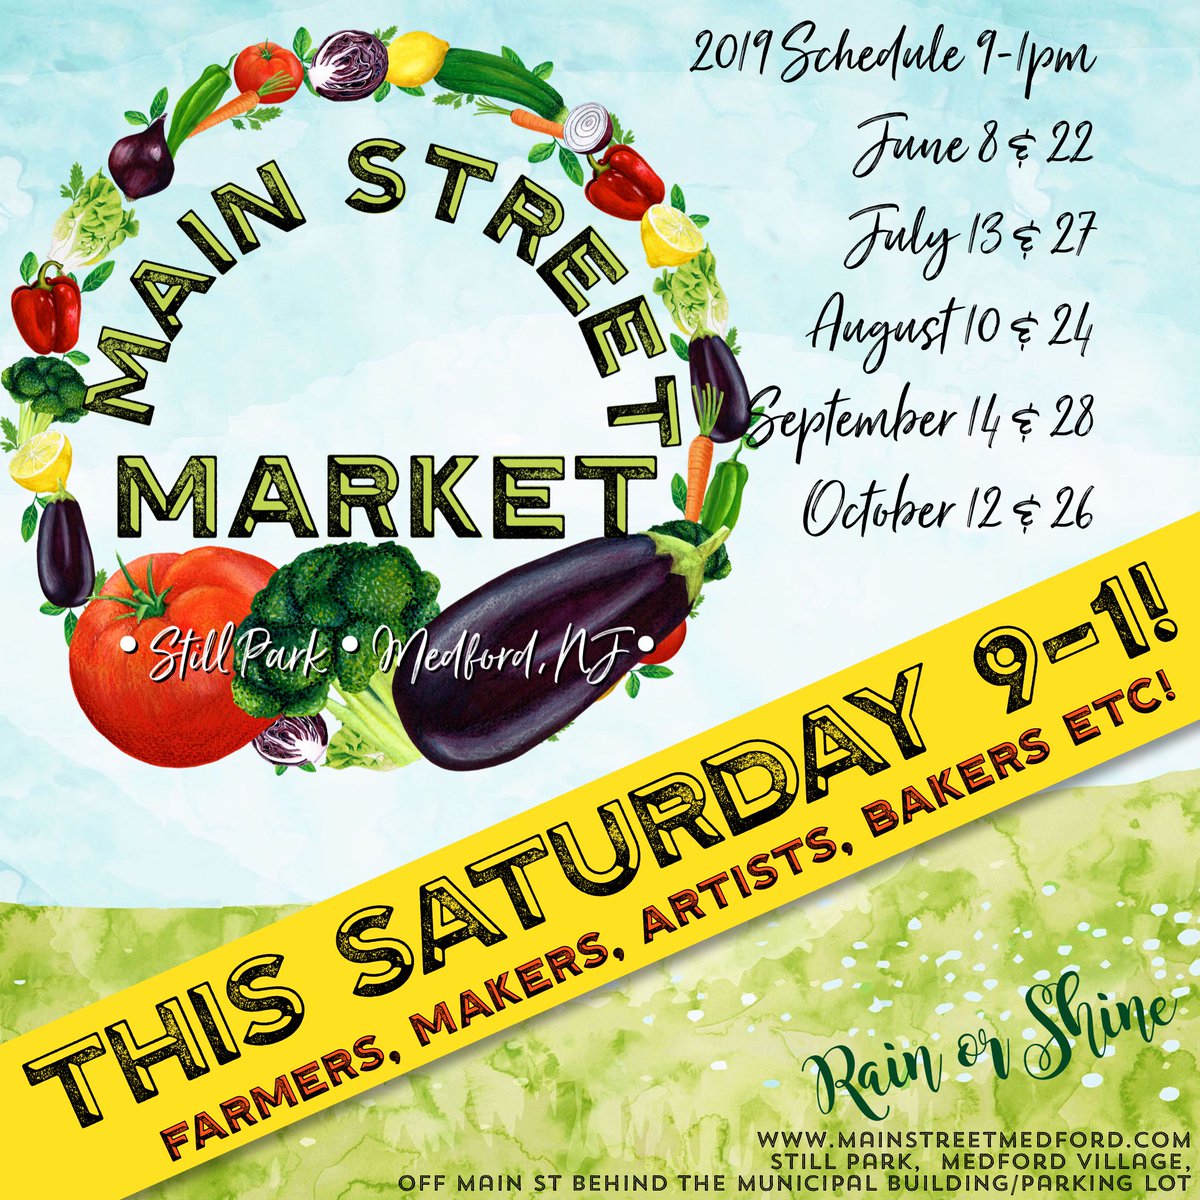 The Main Street Market is this Saturday 9-1 at Still Park! Still Park is just off Main St, behind the Twp Building. Use 88 Charles St for gps! #visitsouthjersey #jerseyfresh #farmmarket #njfarms #farmersmarket #destinationmedford #discoversj #njfun 
ow.ly/xpGN30pARlW